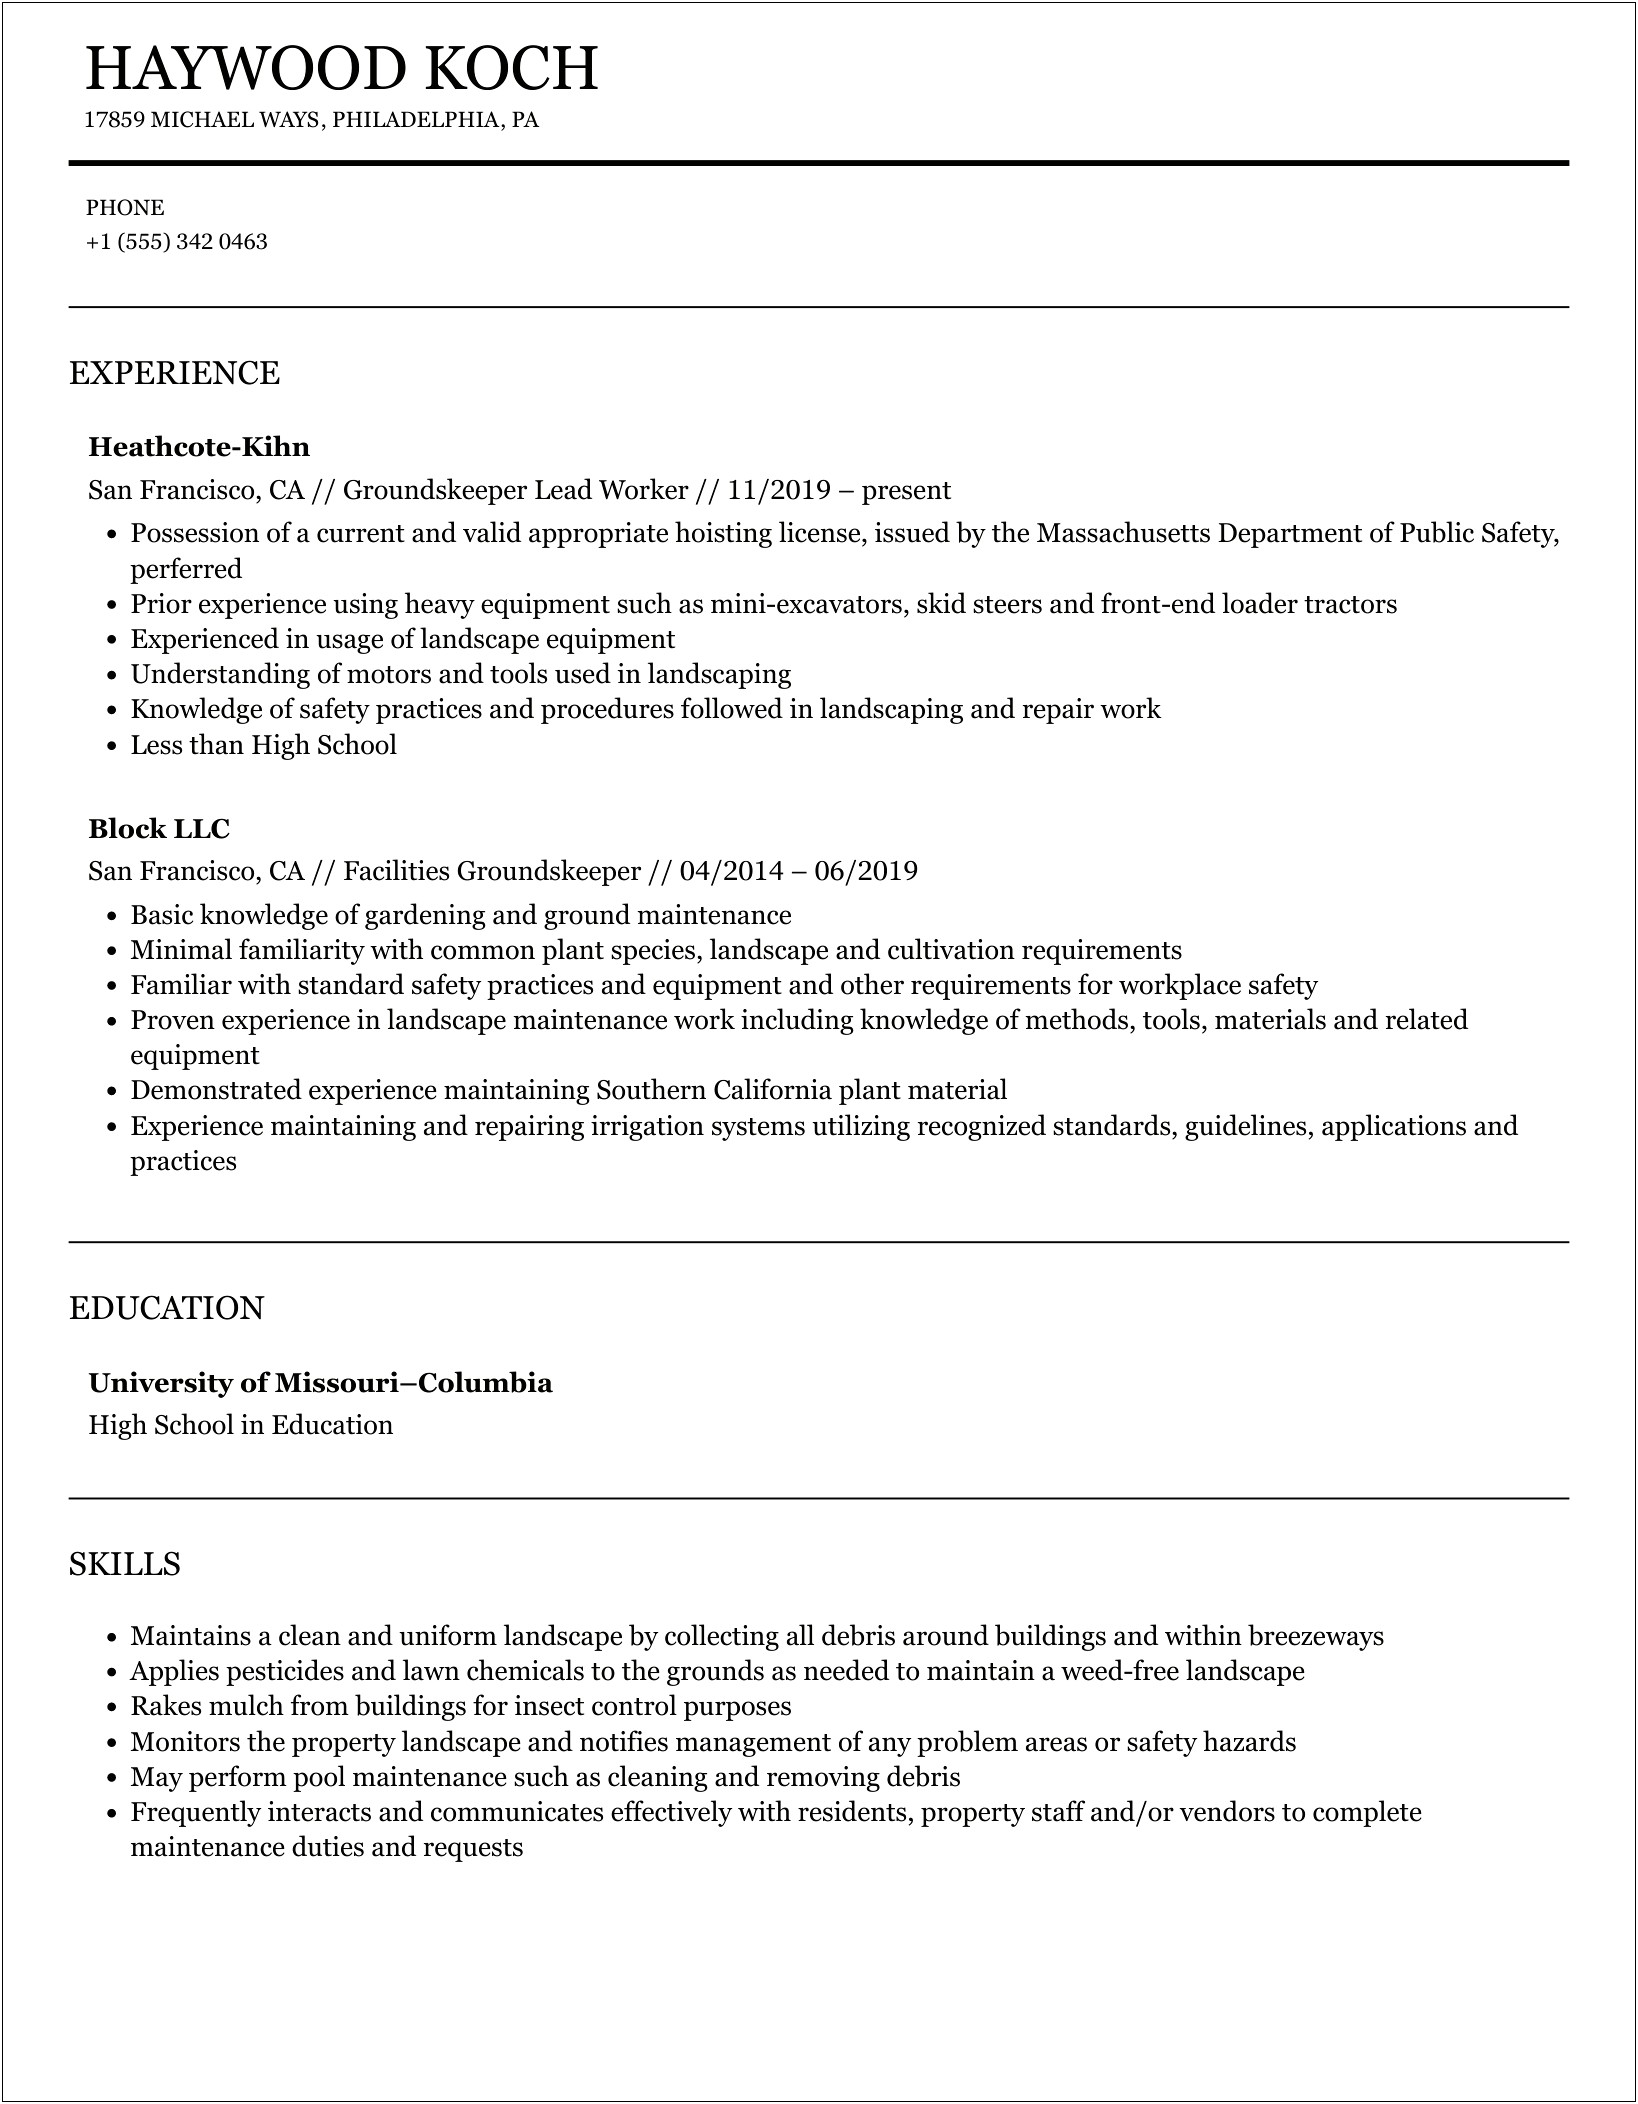 Experience Examples Resume For Grounds Keeper